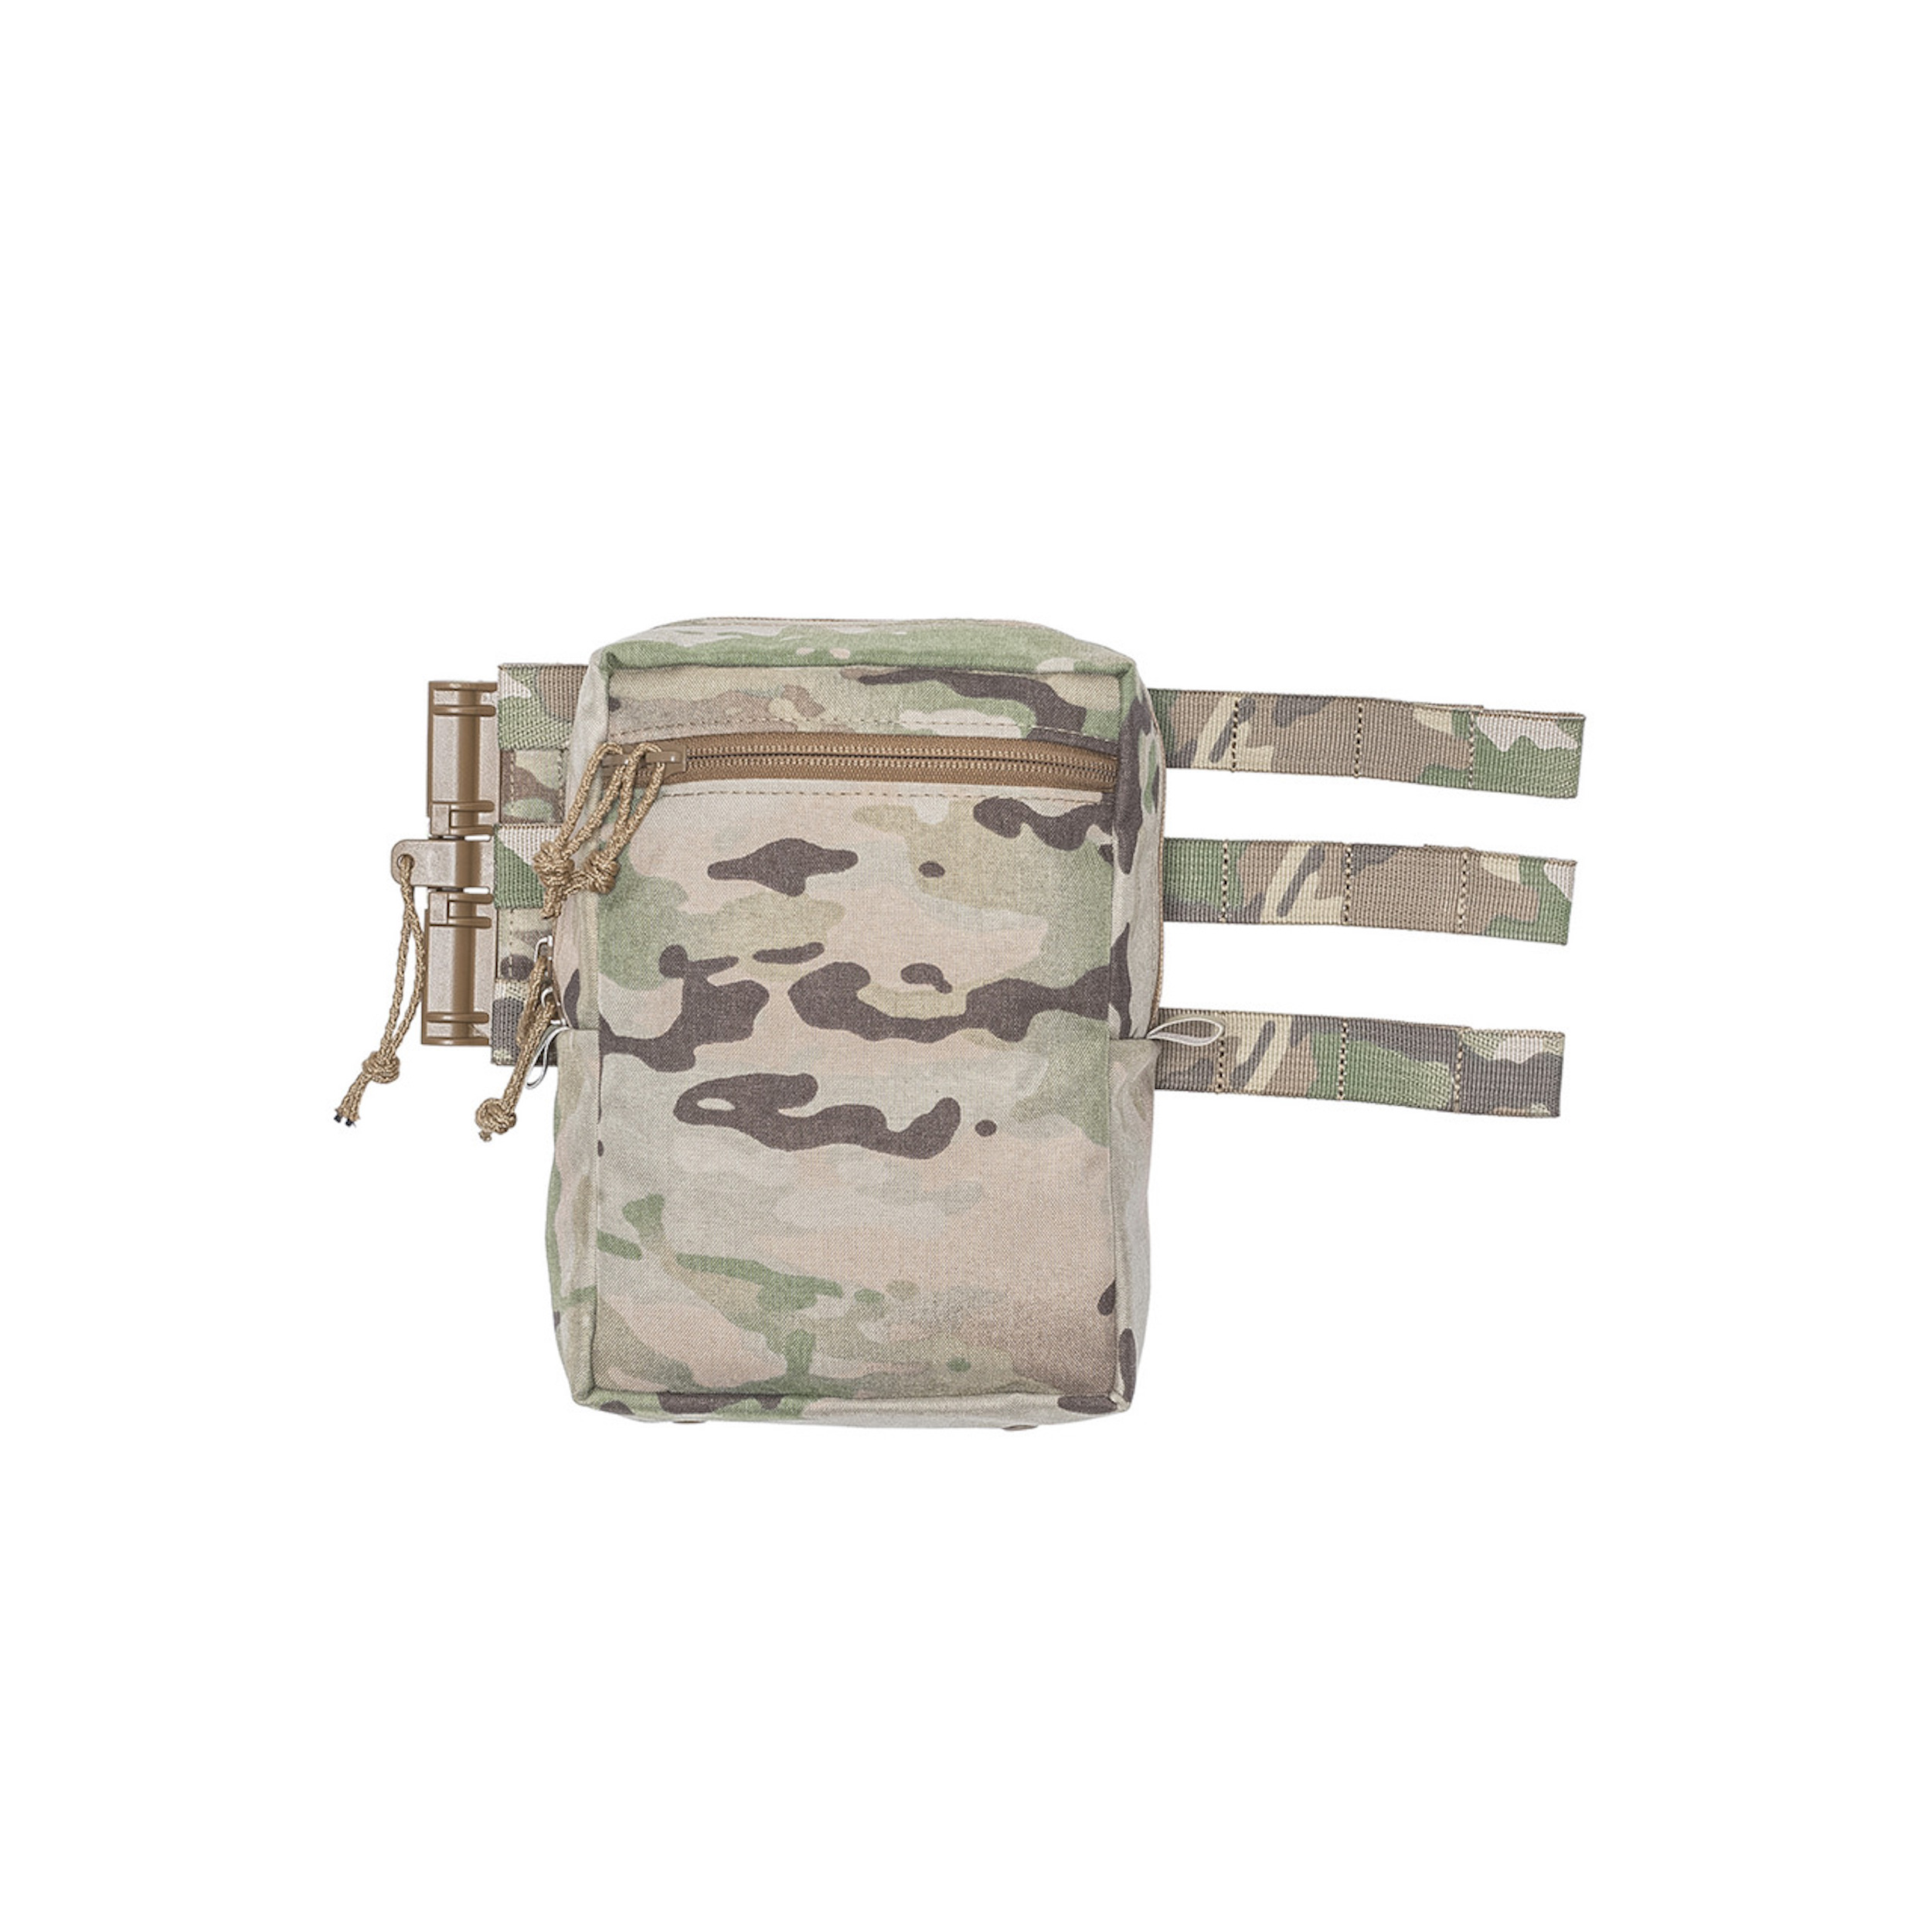 _0001s_0007_GP_Tall_MOLLE_CMBD_Front__51133.1644267820.jpg